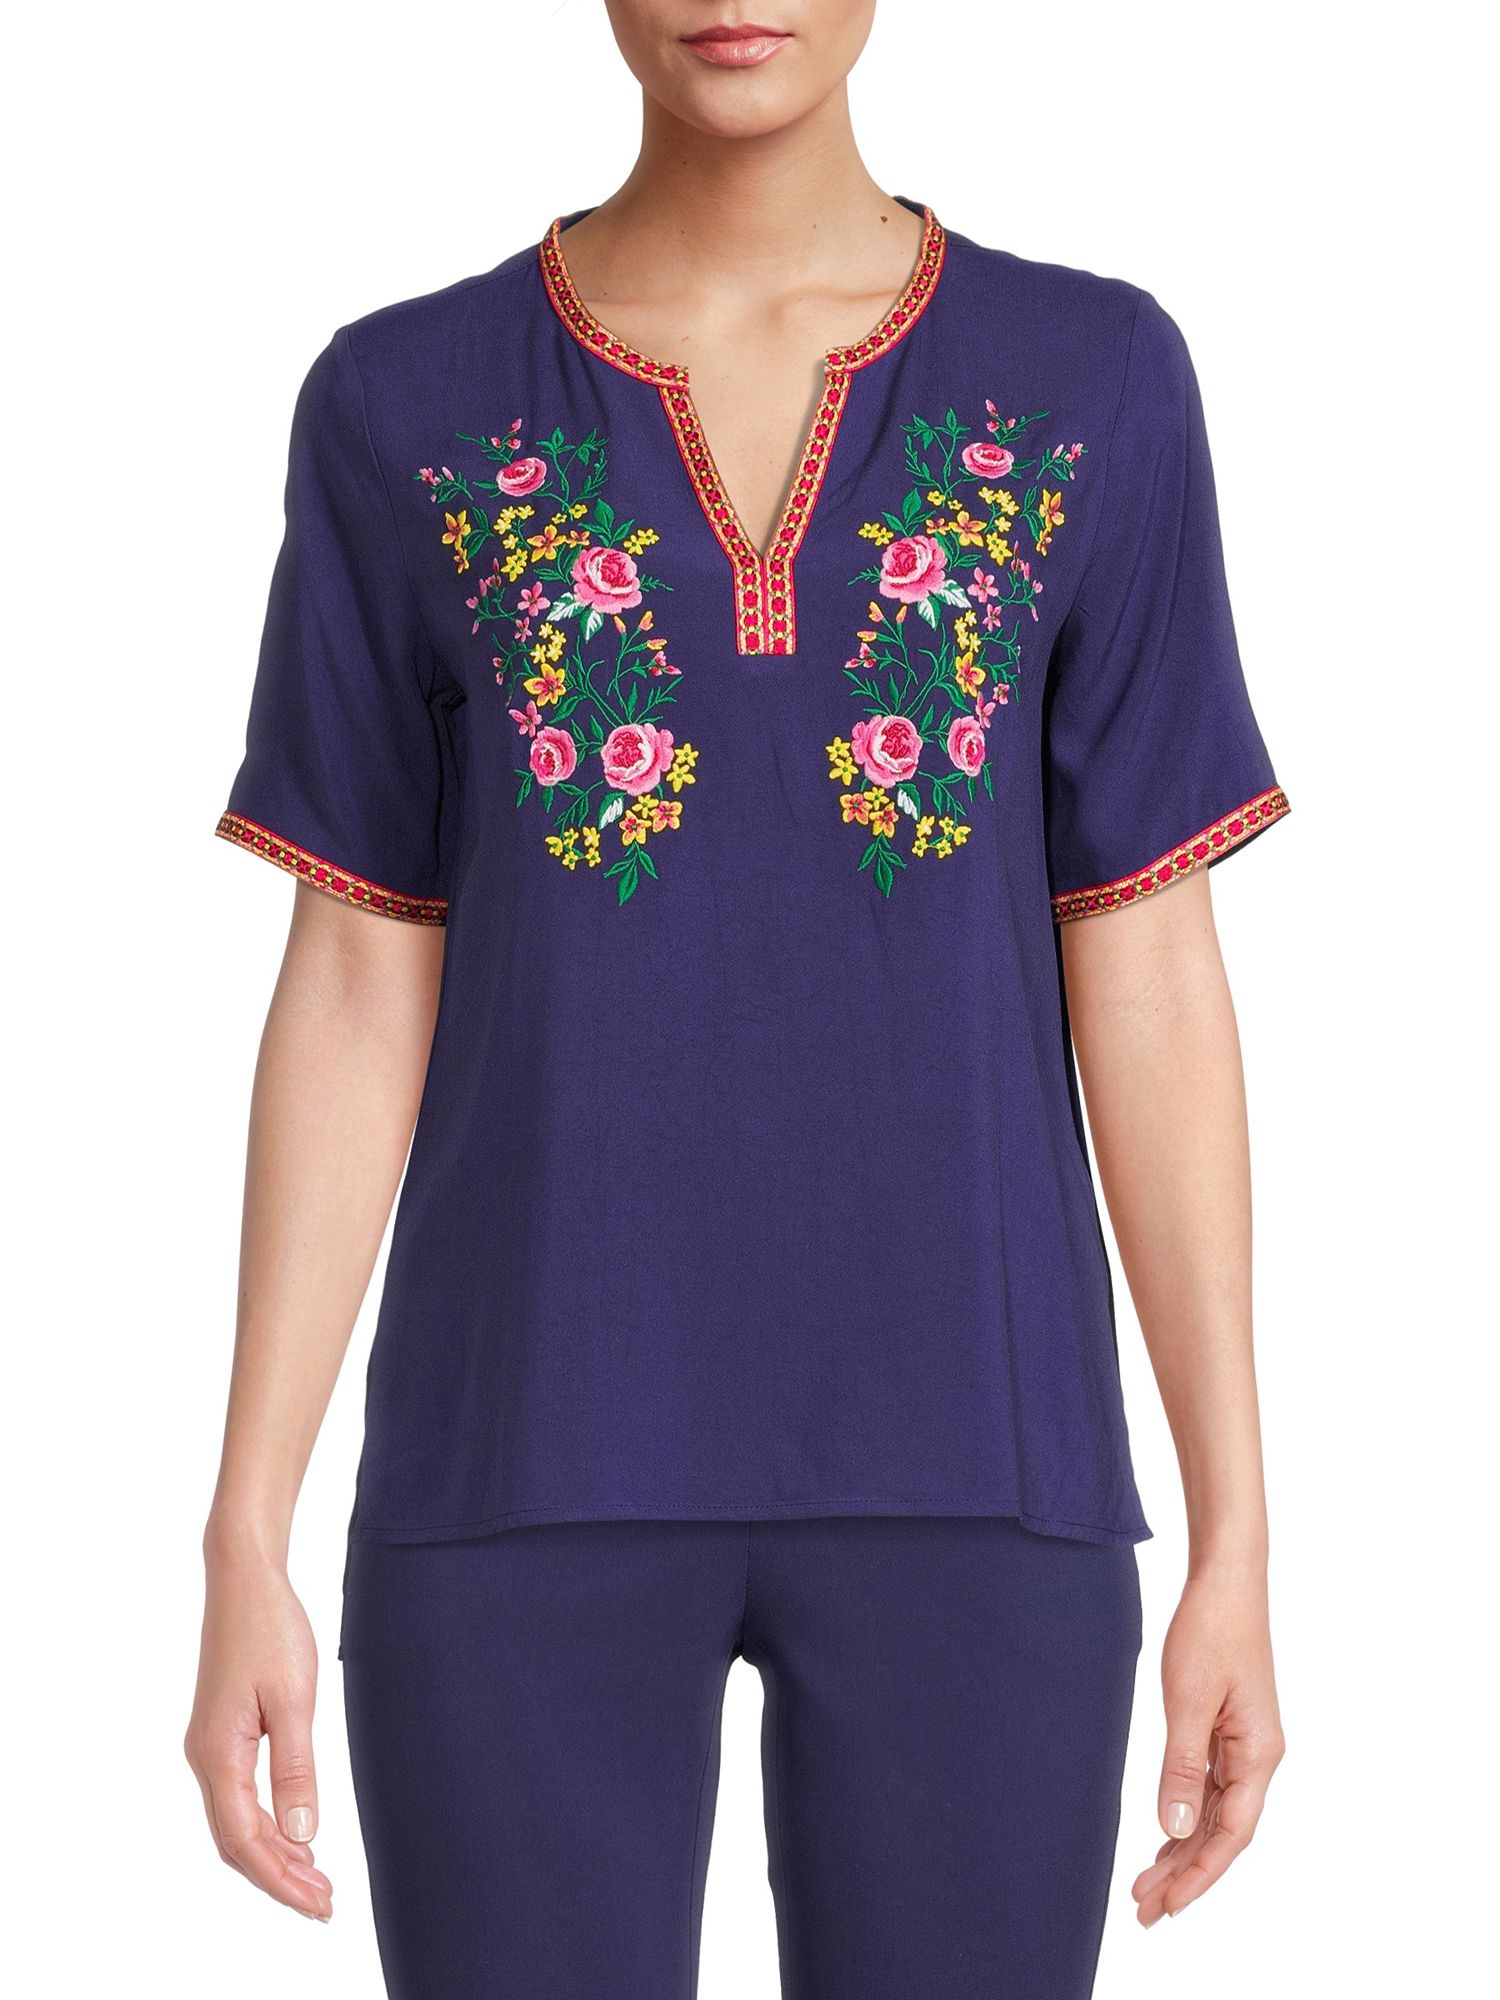 The Pioneer Woman Notch Neck Embroidered Top with Short Sleeves